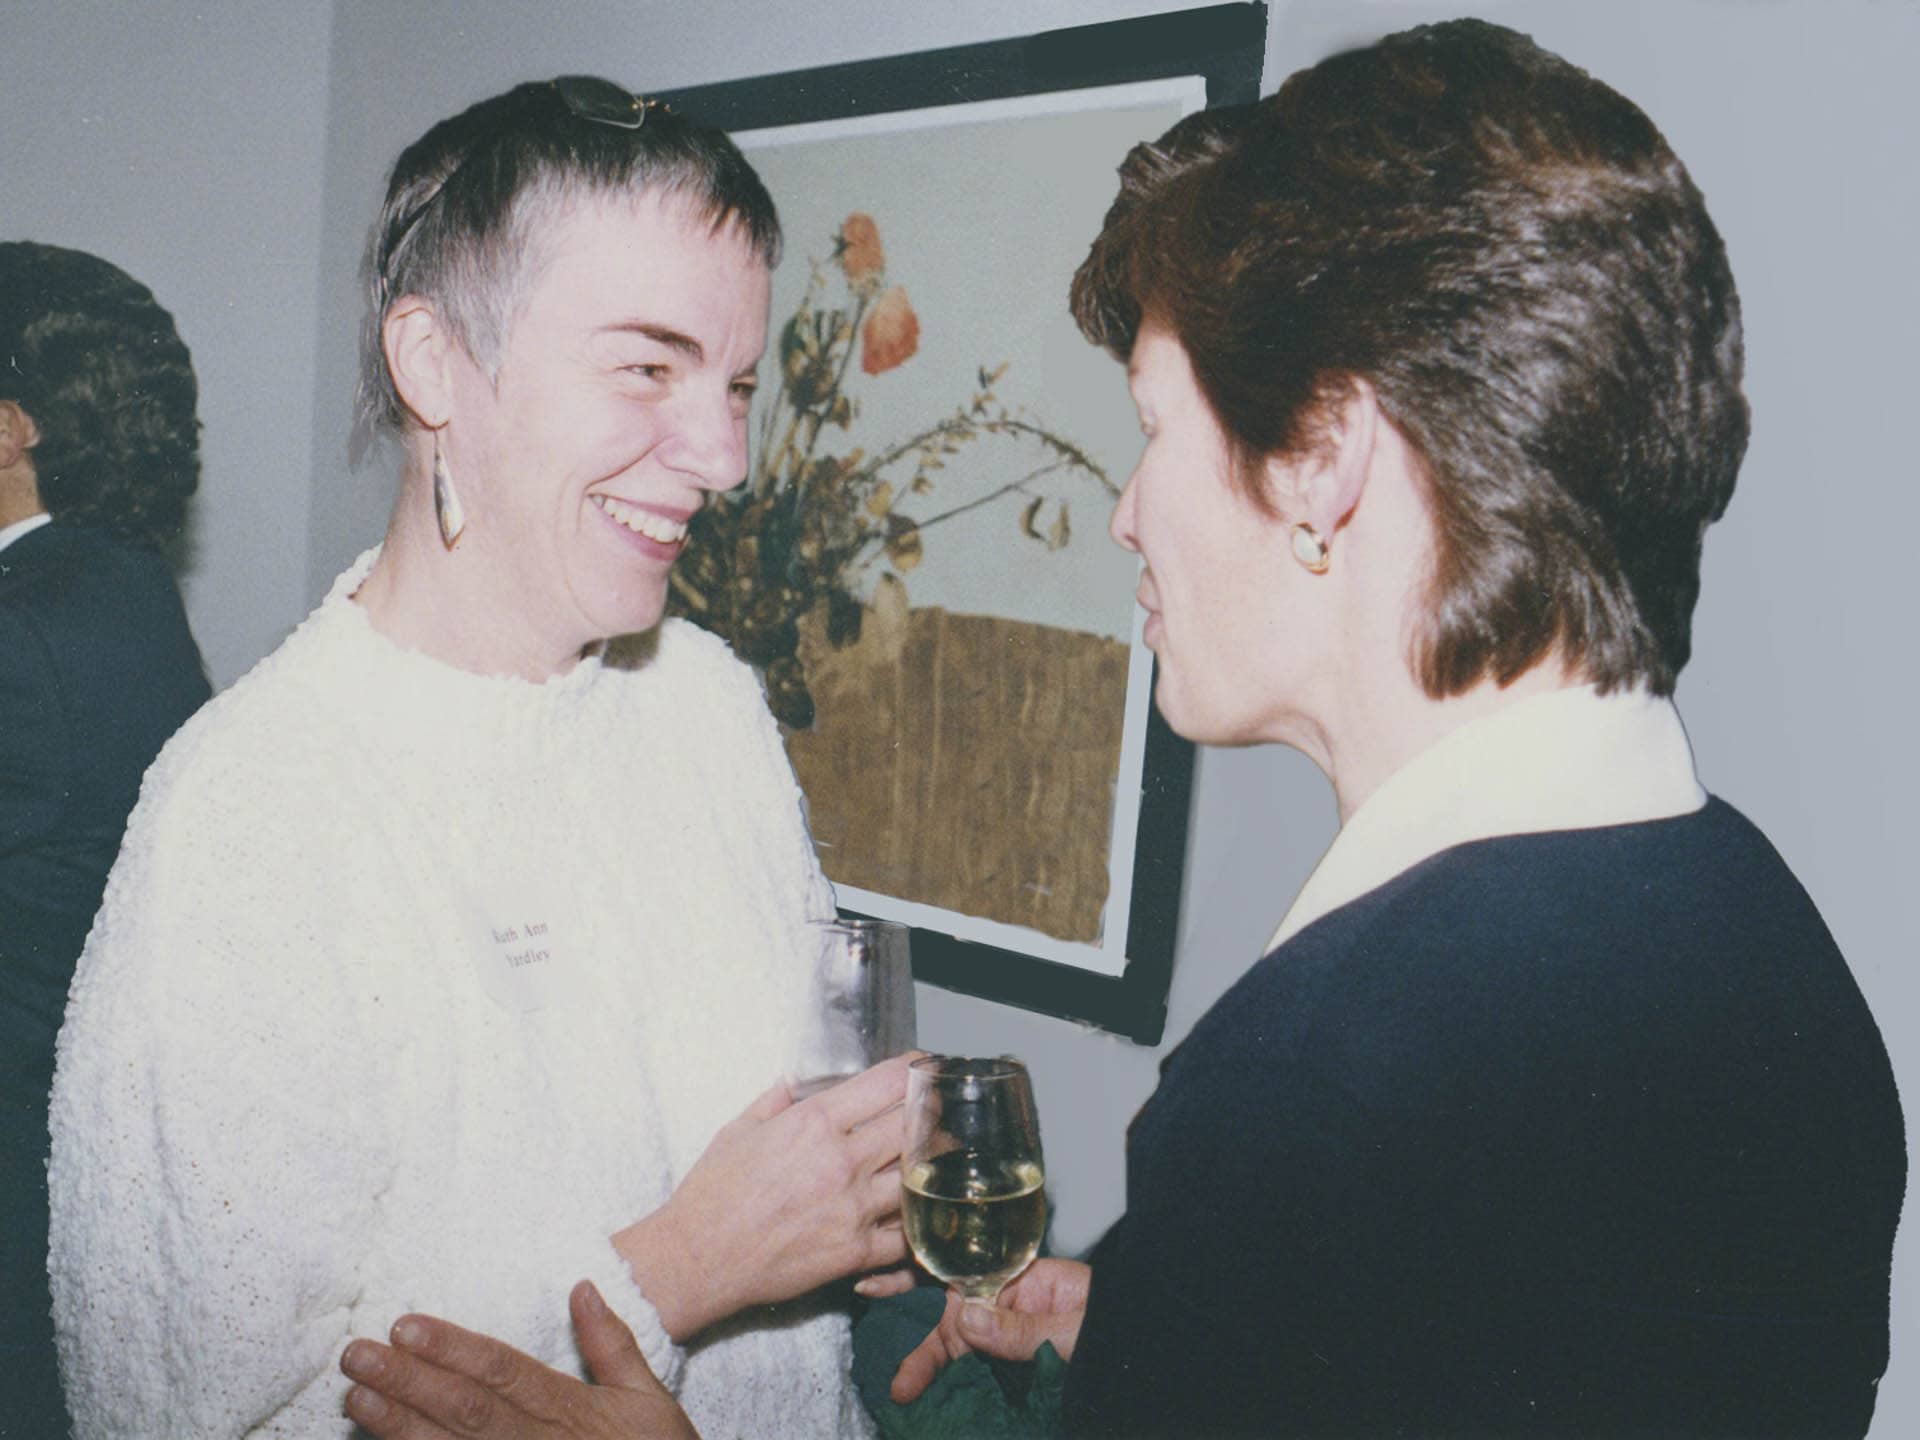 1994, Opening of Perspectives MGM Inc. in Calgary, Ruth Ann and Spice, from mentor to mentee to lifelong mental companions